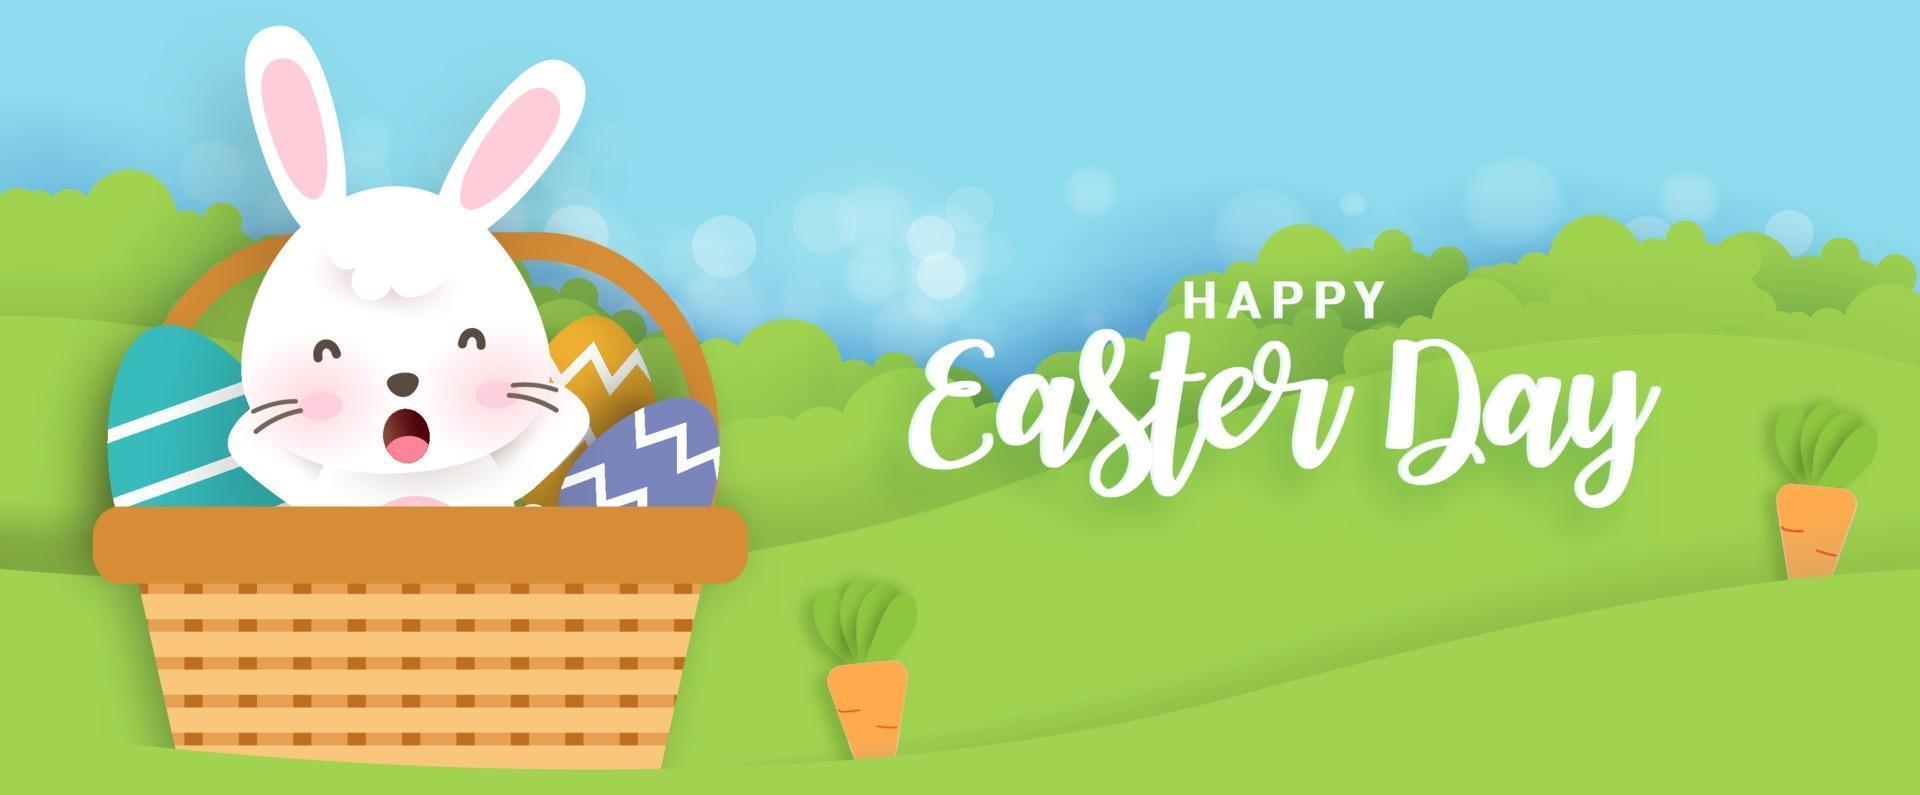 Happy Easter day sale banner vector